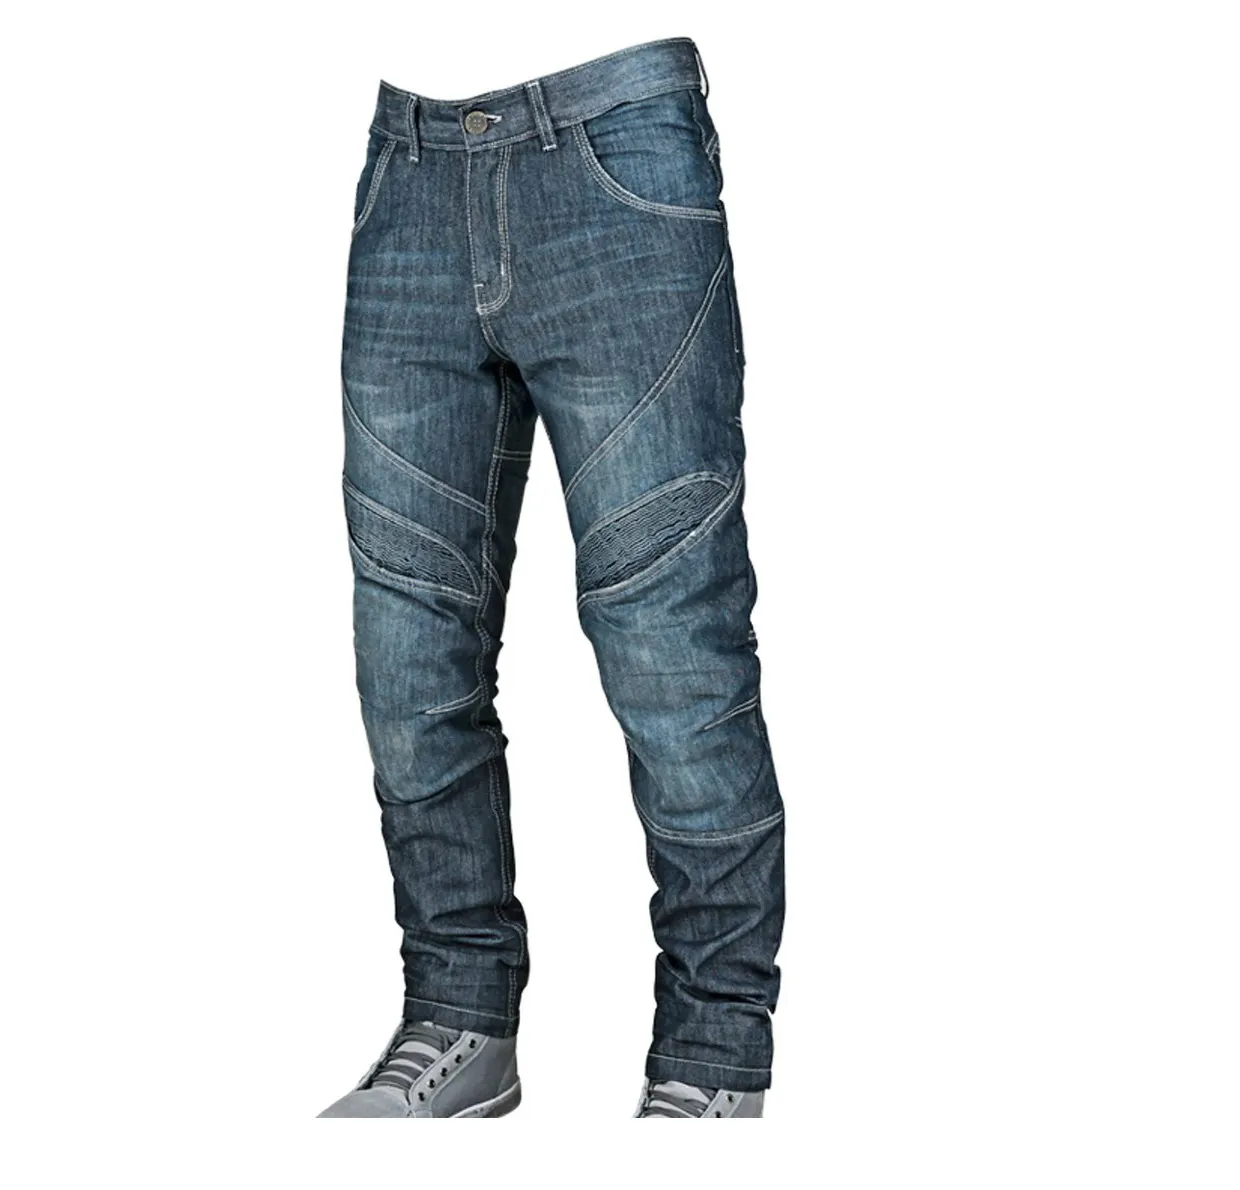 Motorbike Slim Men's Motorcycle Motorbike Riding Jeans With Protection Pads